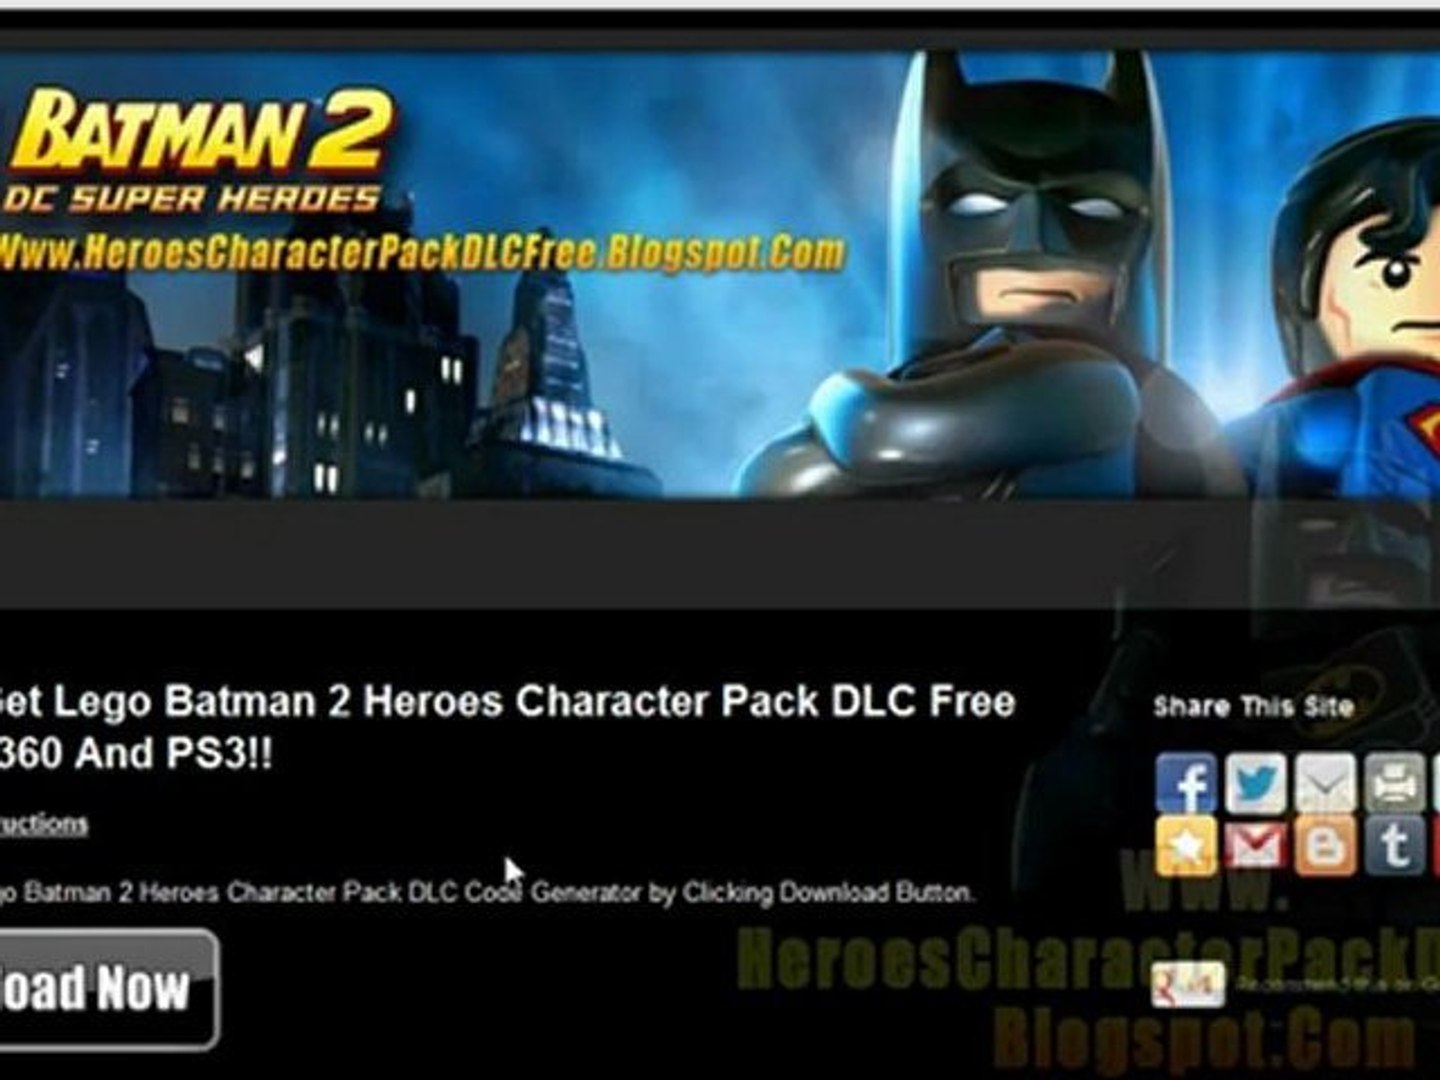 How to Get Lego Batman 2 Heroes Character Pack DLC Free!! - video  Dailymotion